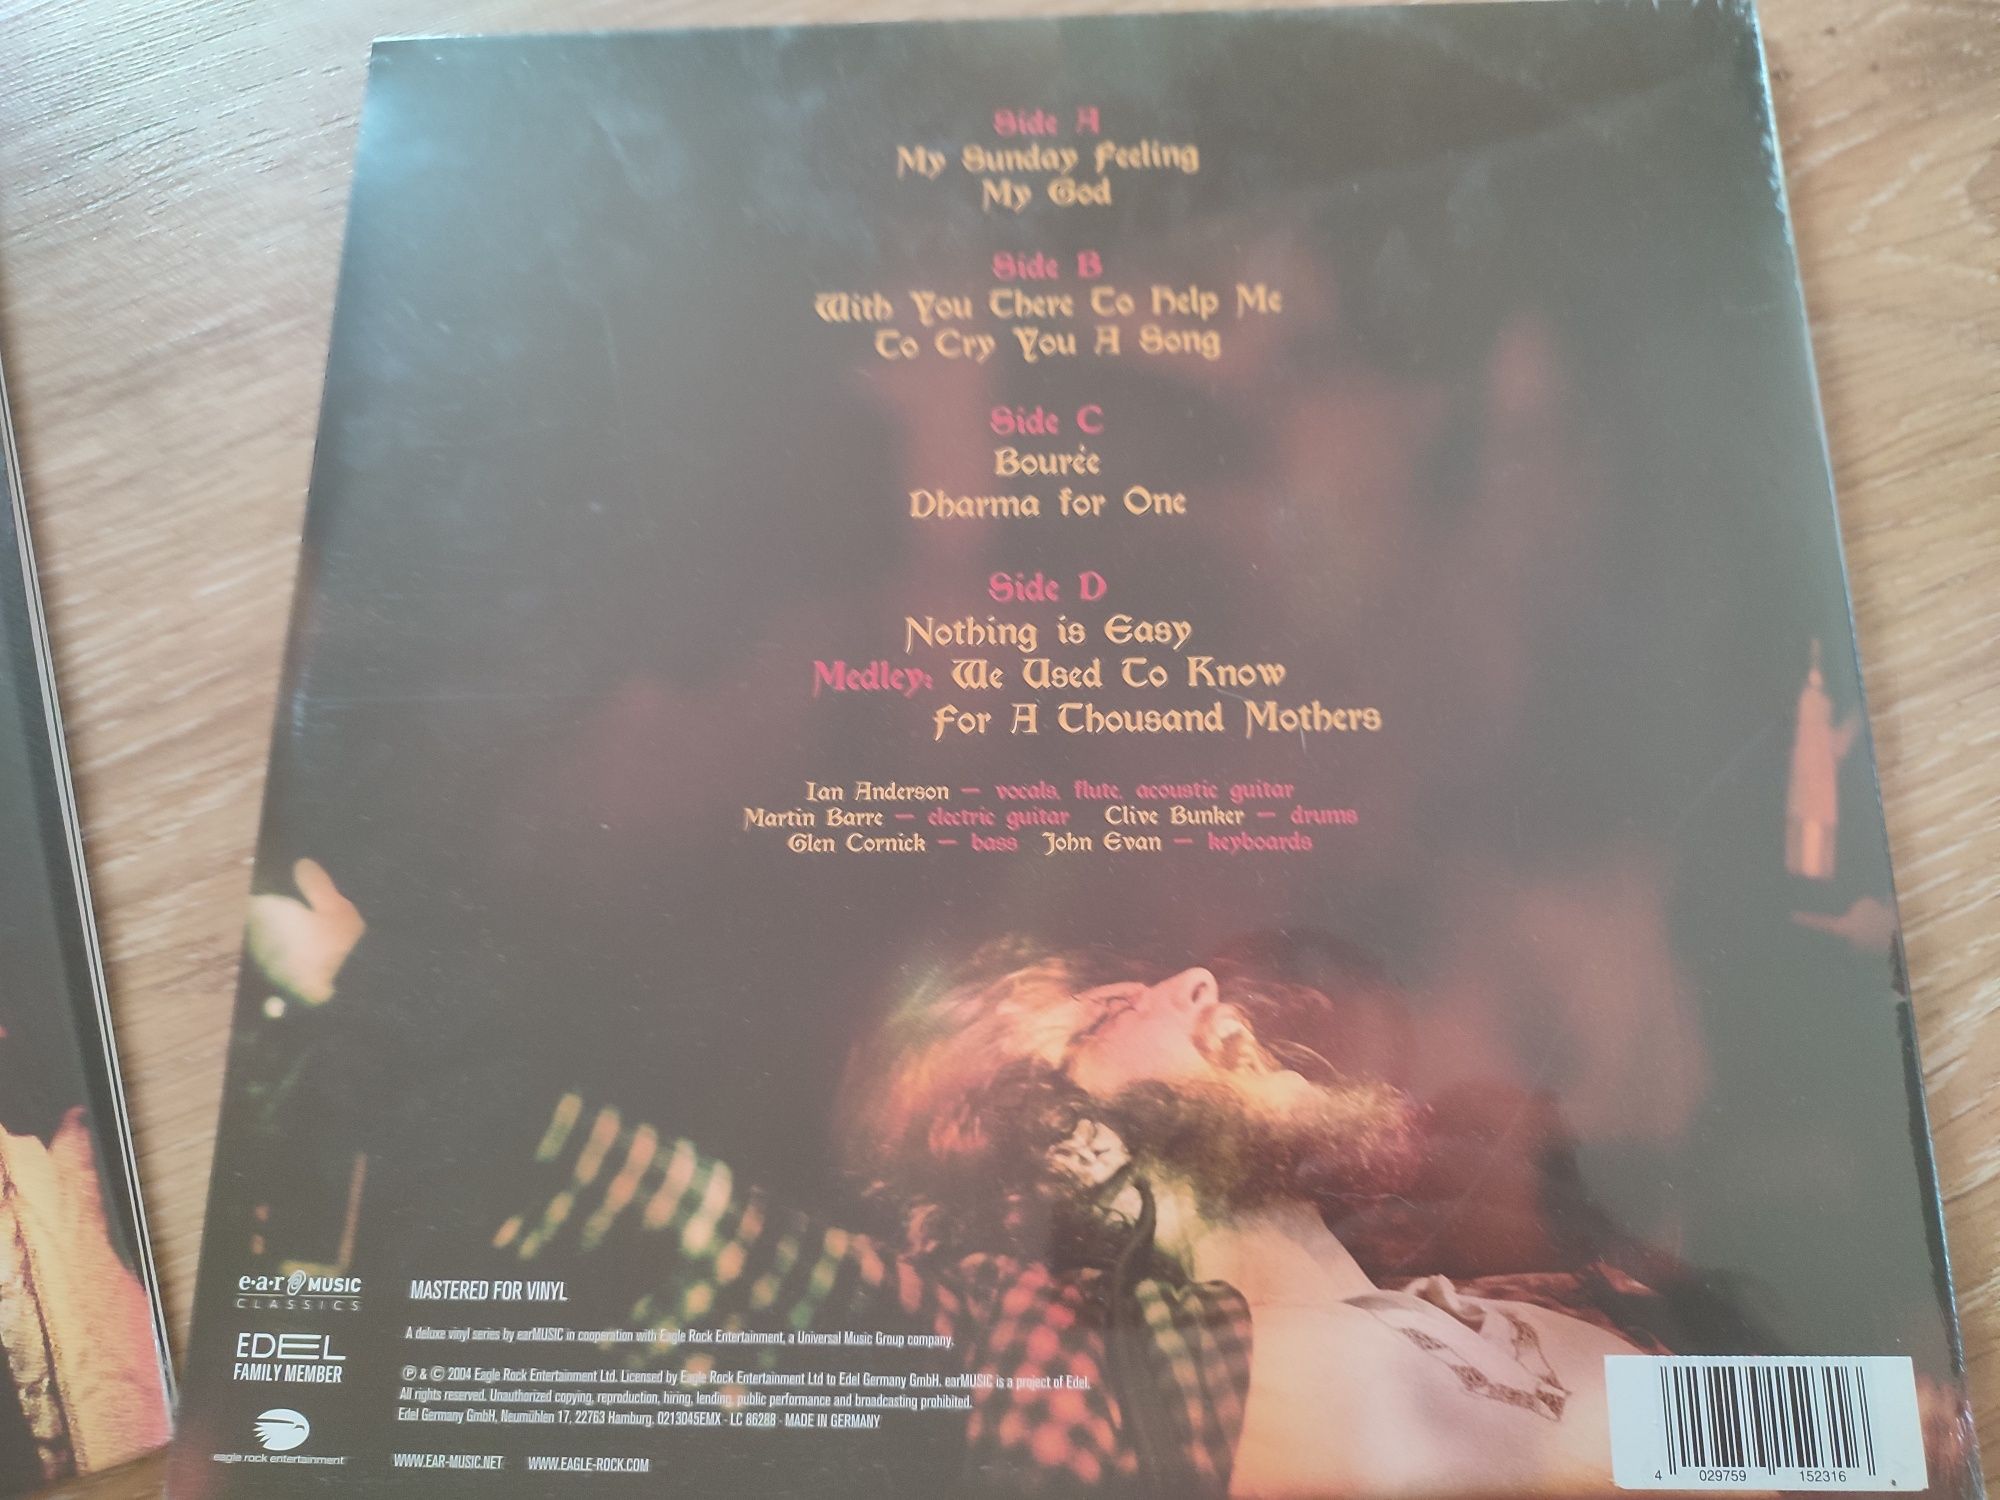 Jethro Tull - Nothing Is Easyv(Live At The Isle Of Wight 1970)
2 LP